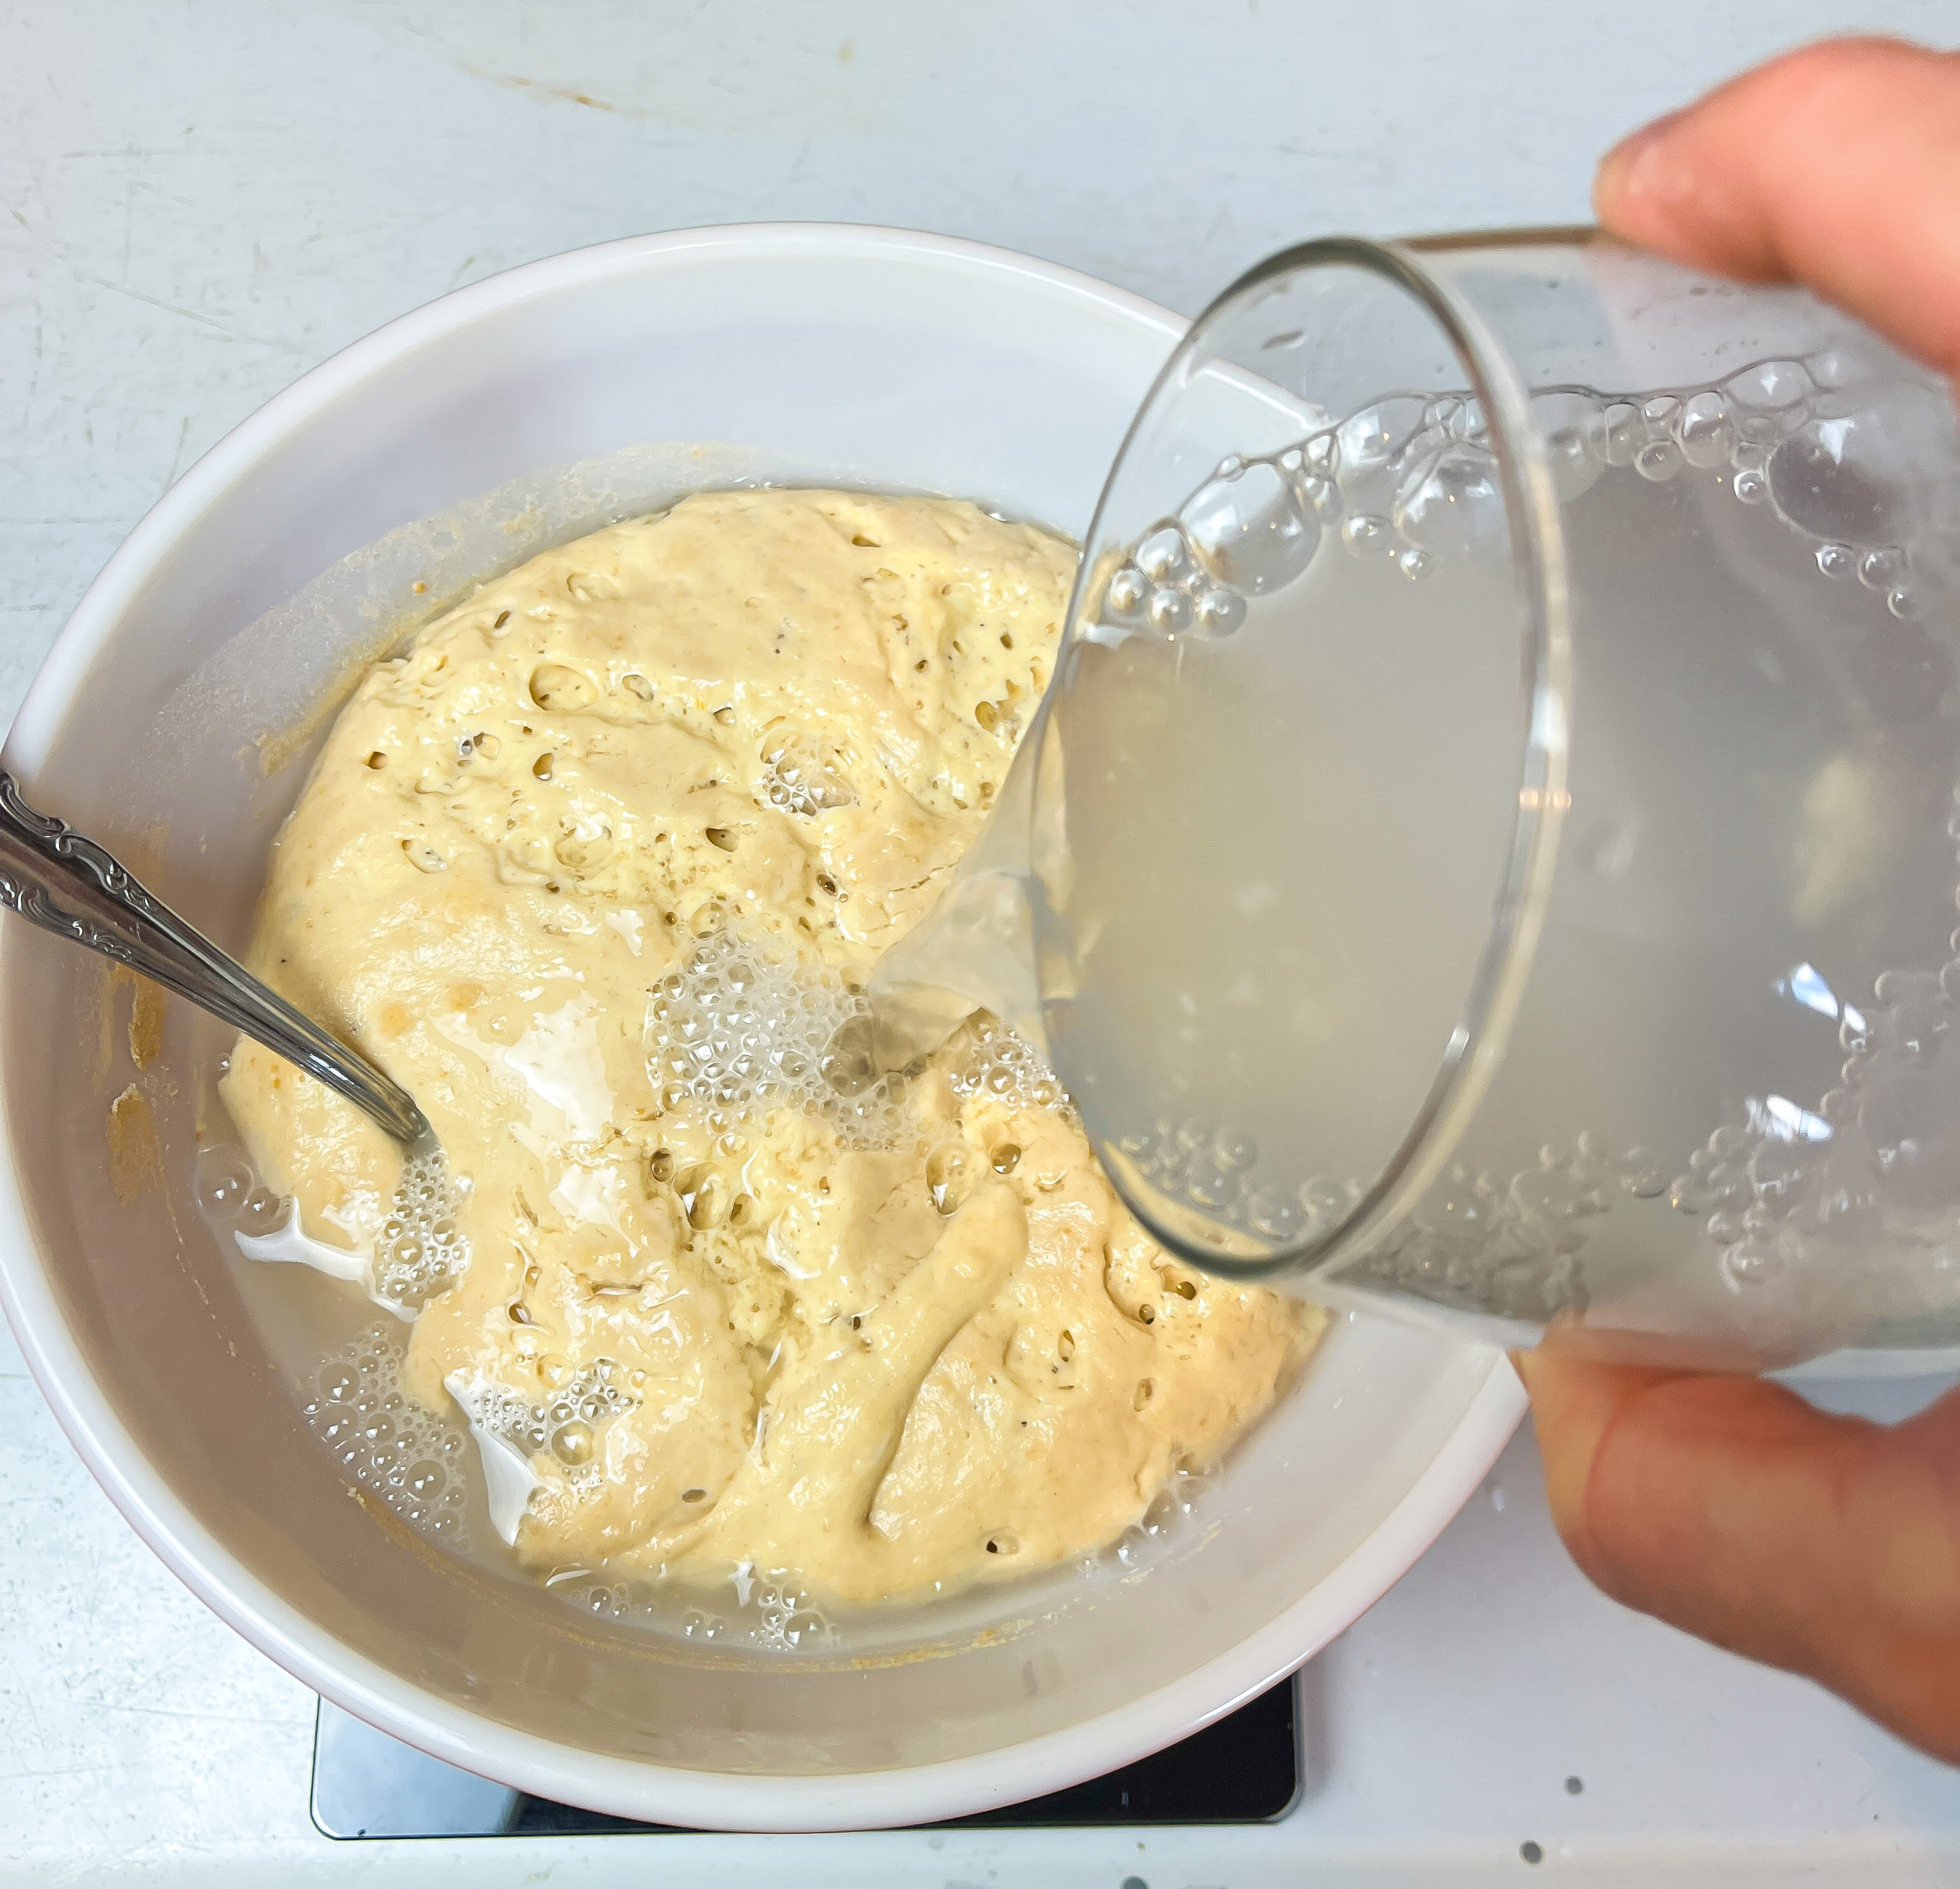 sourdough starter in a white bowl with a glass of water being poured into it